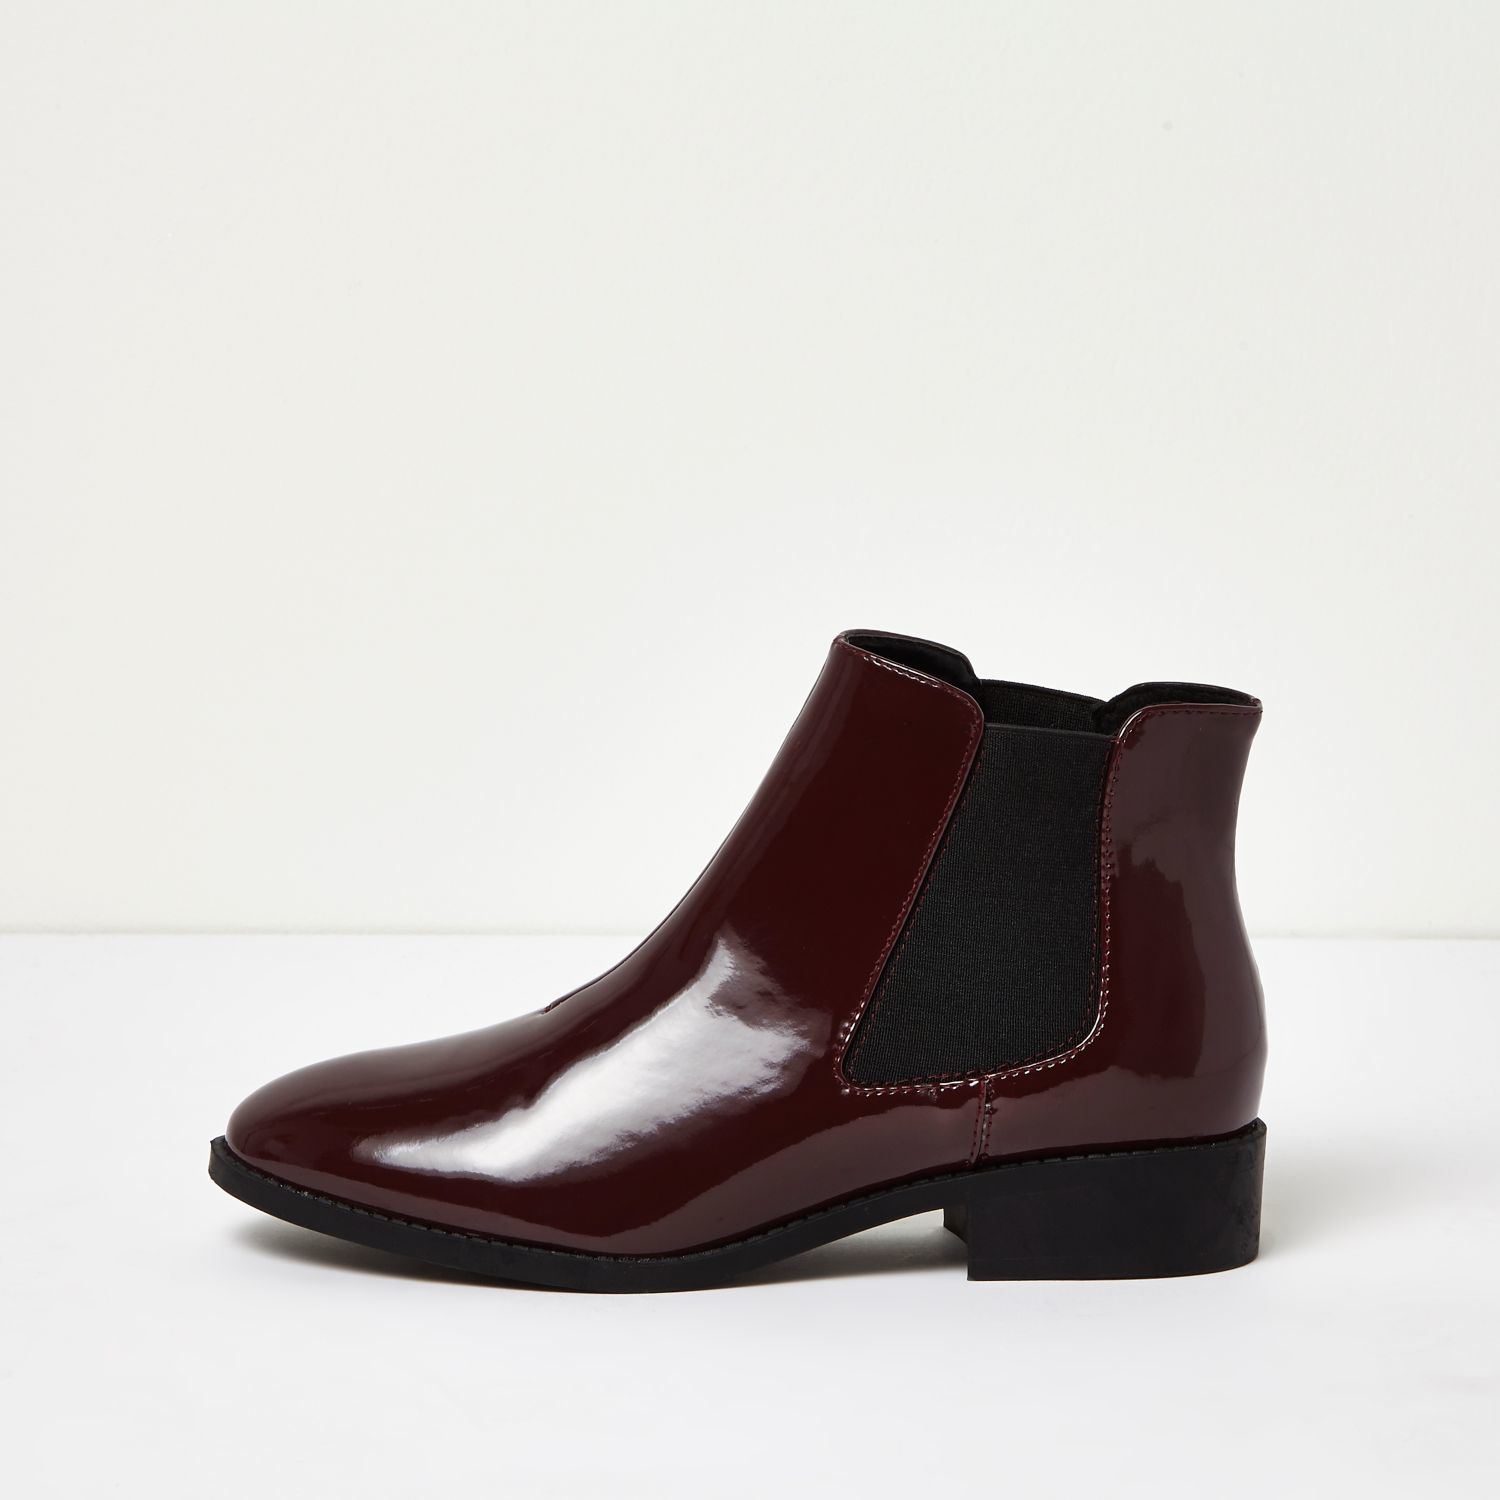 River Island Burgundy Patent Chelsea Boots in Red - Lyst